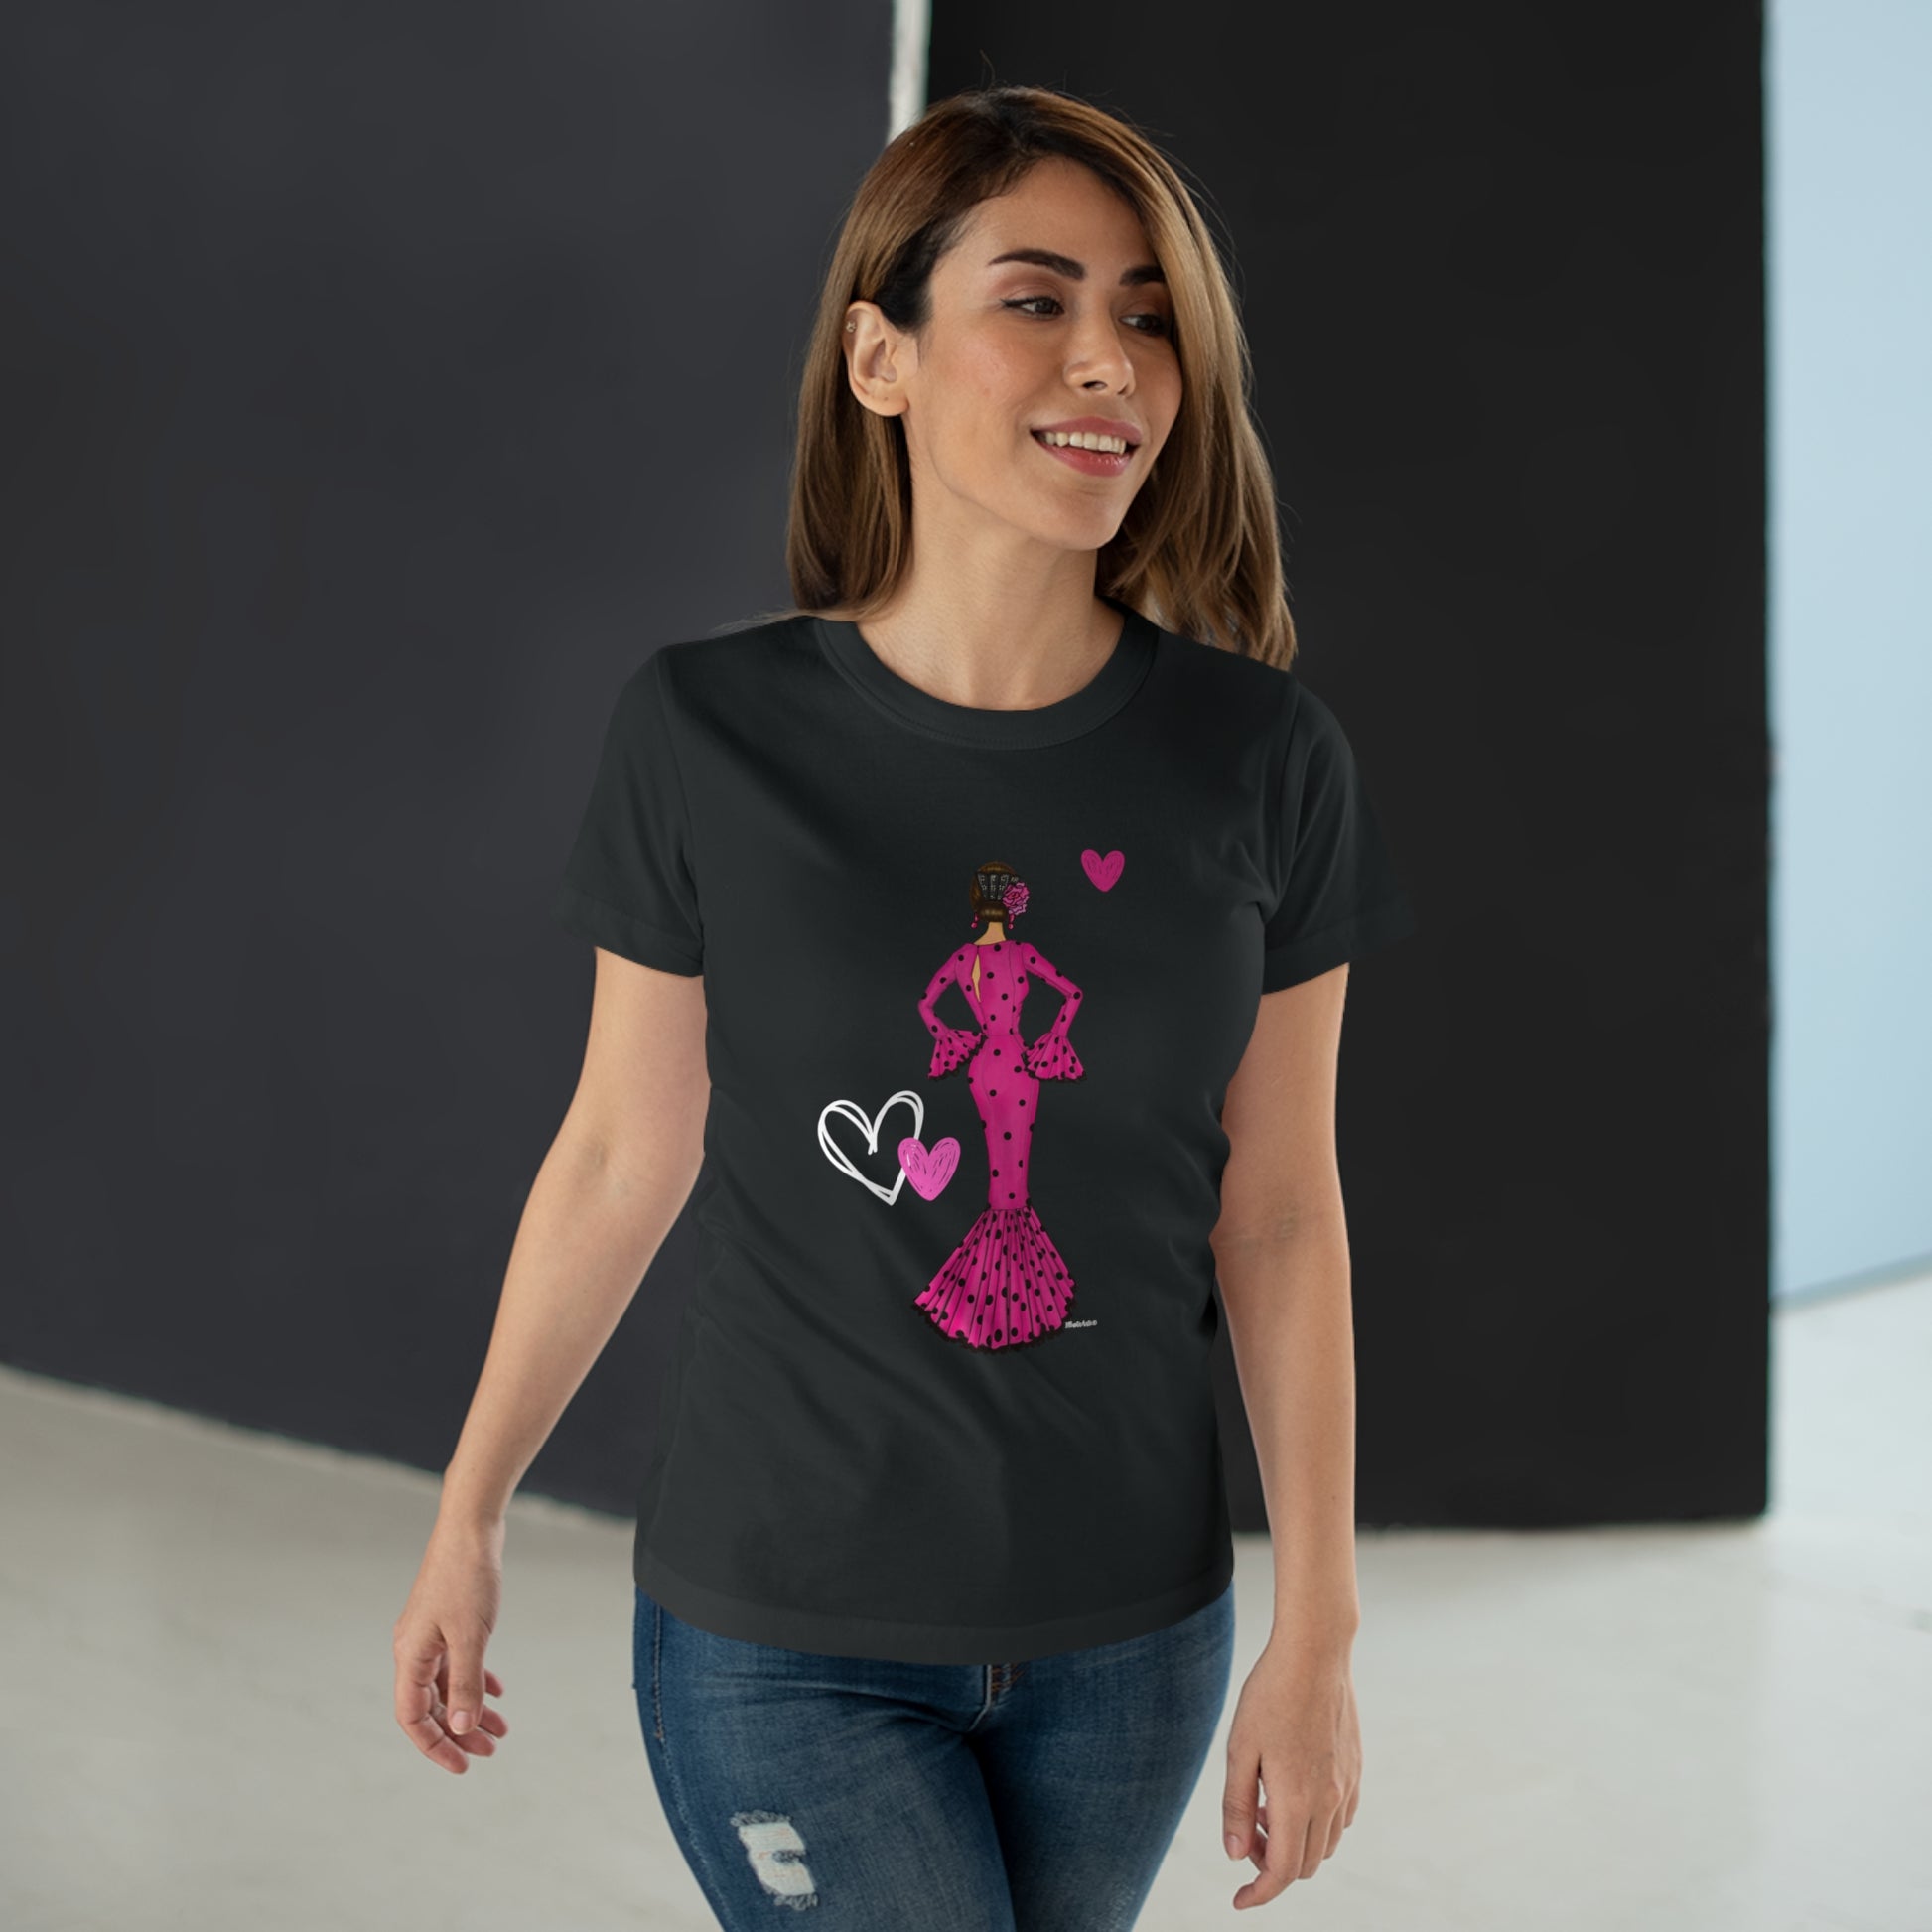 a woman wearing a t - shirt with a princess silhouette on it